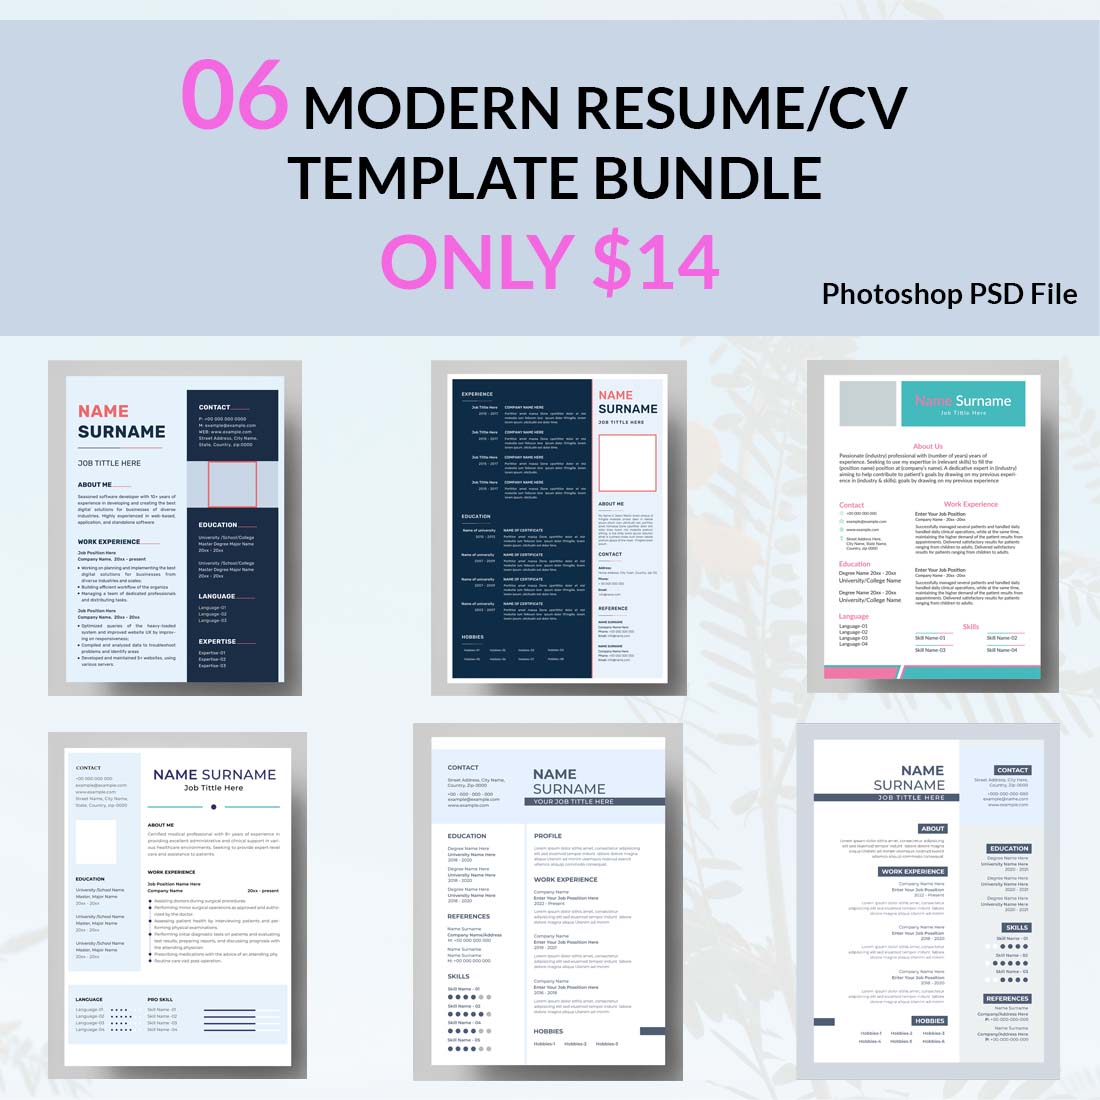 06 MODERN RESUME/CV TEMPLATE BUNDLE ONLY $14 preview image.